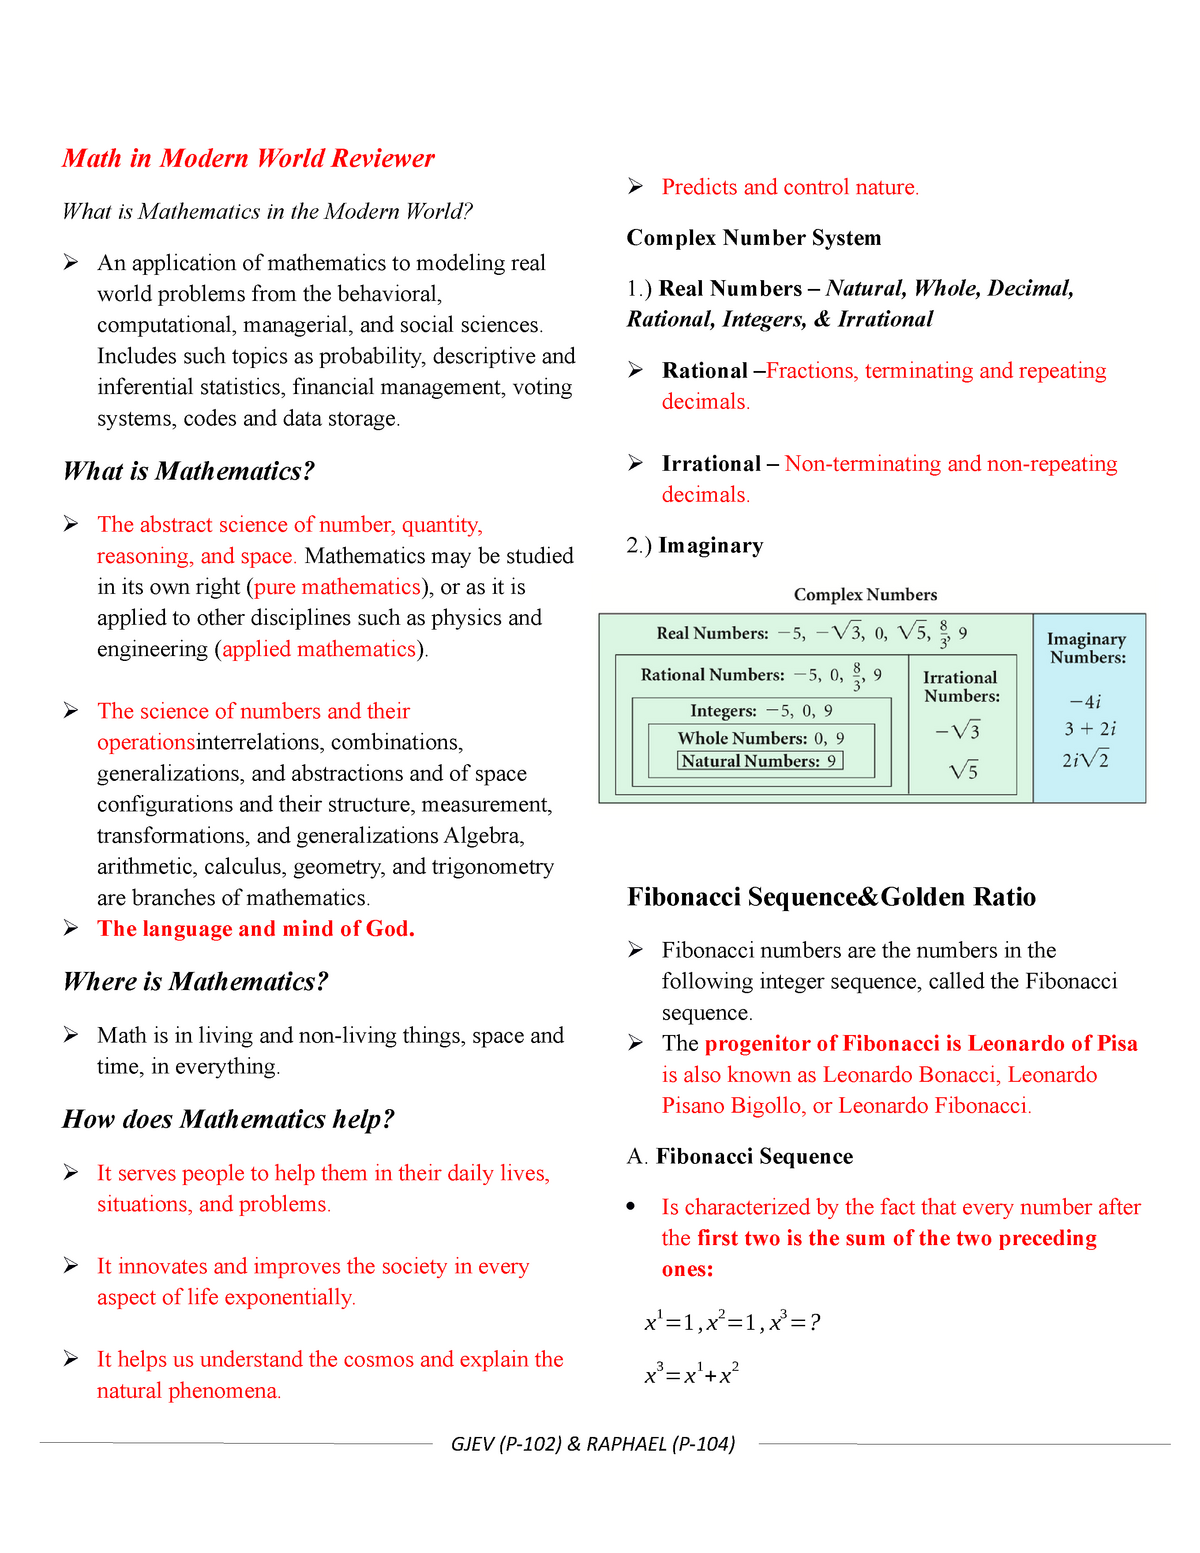 reflective essay about mathematics in the modern world